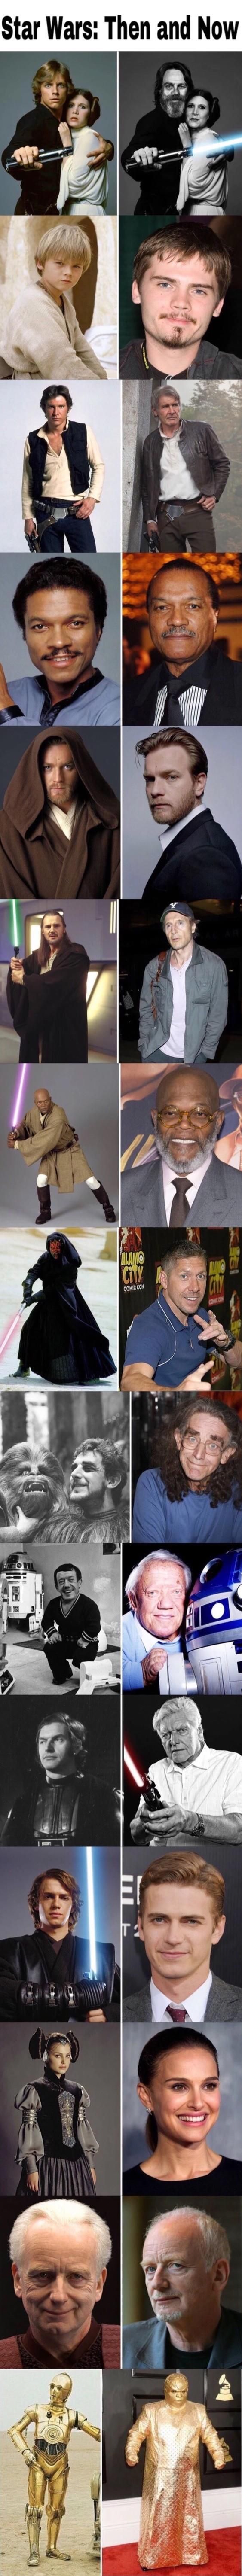 star wars now and then